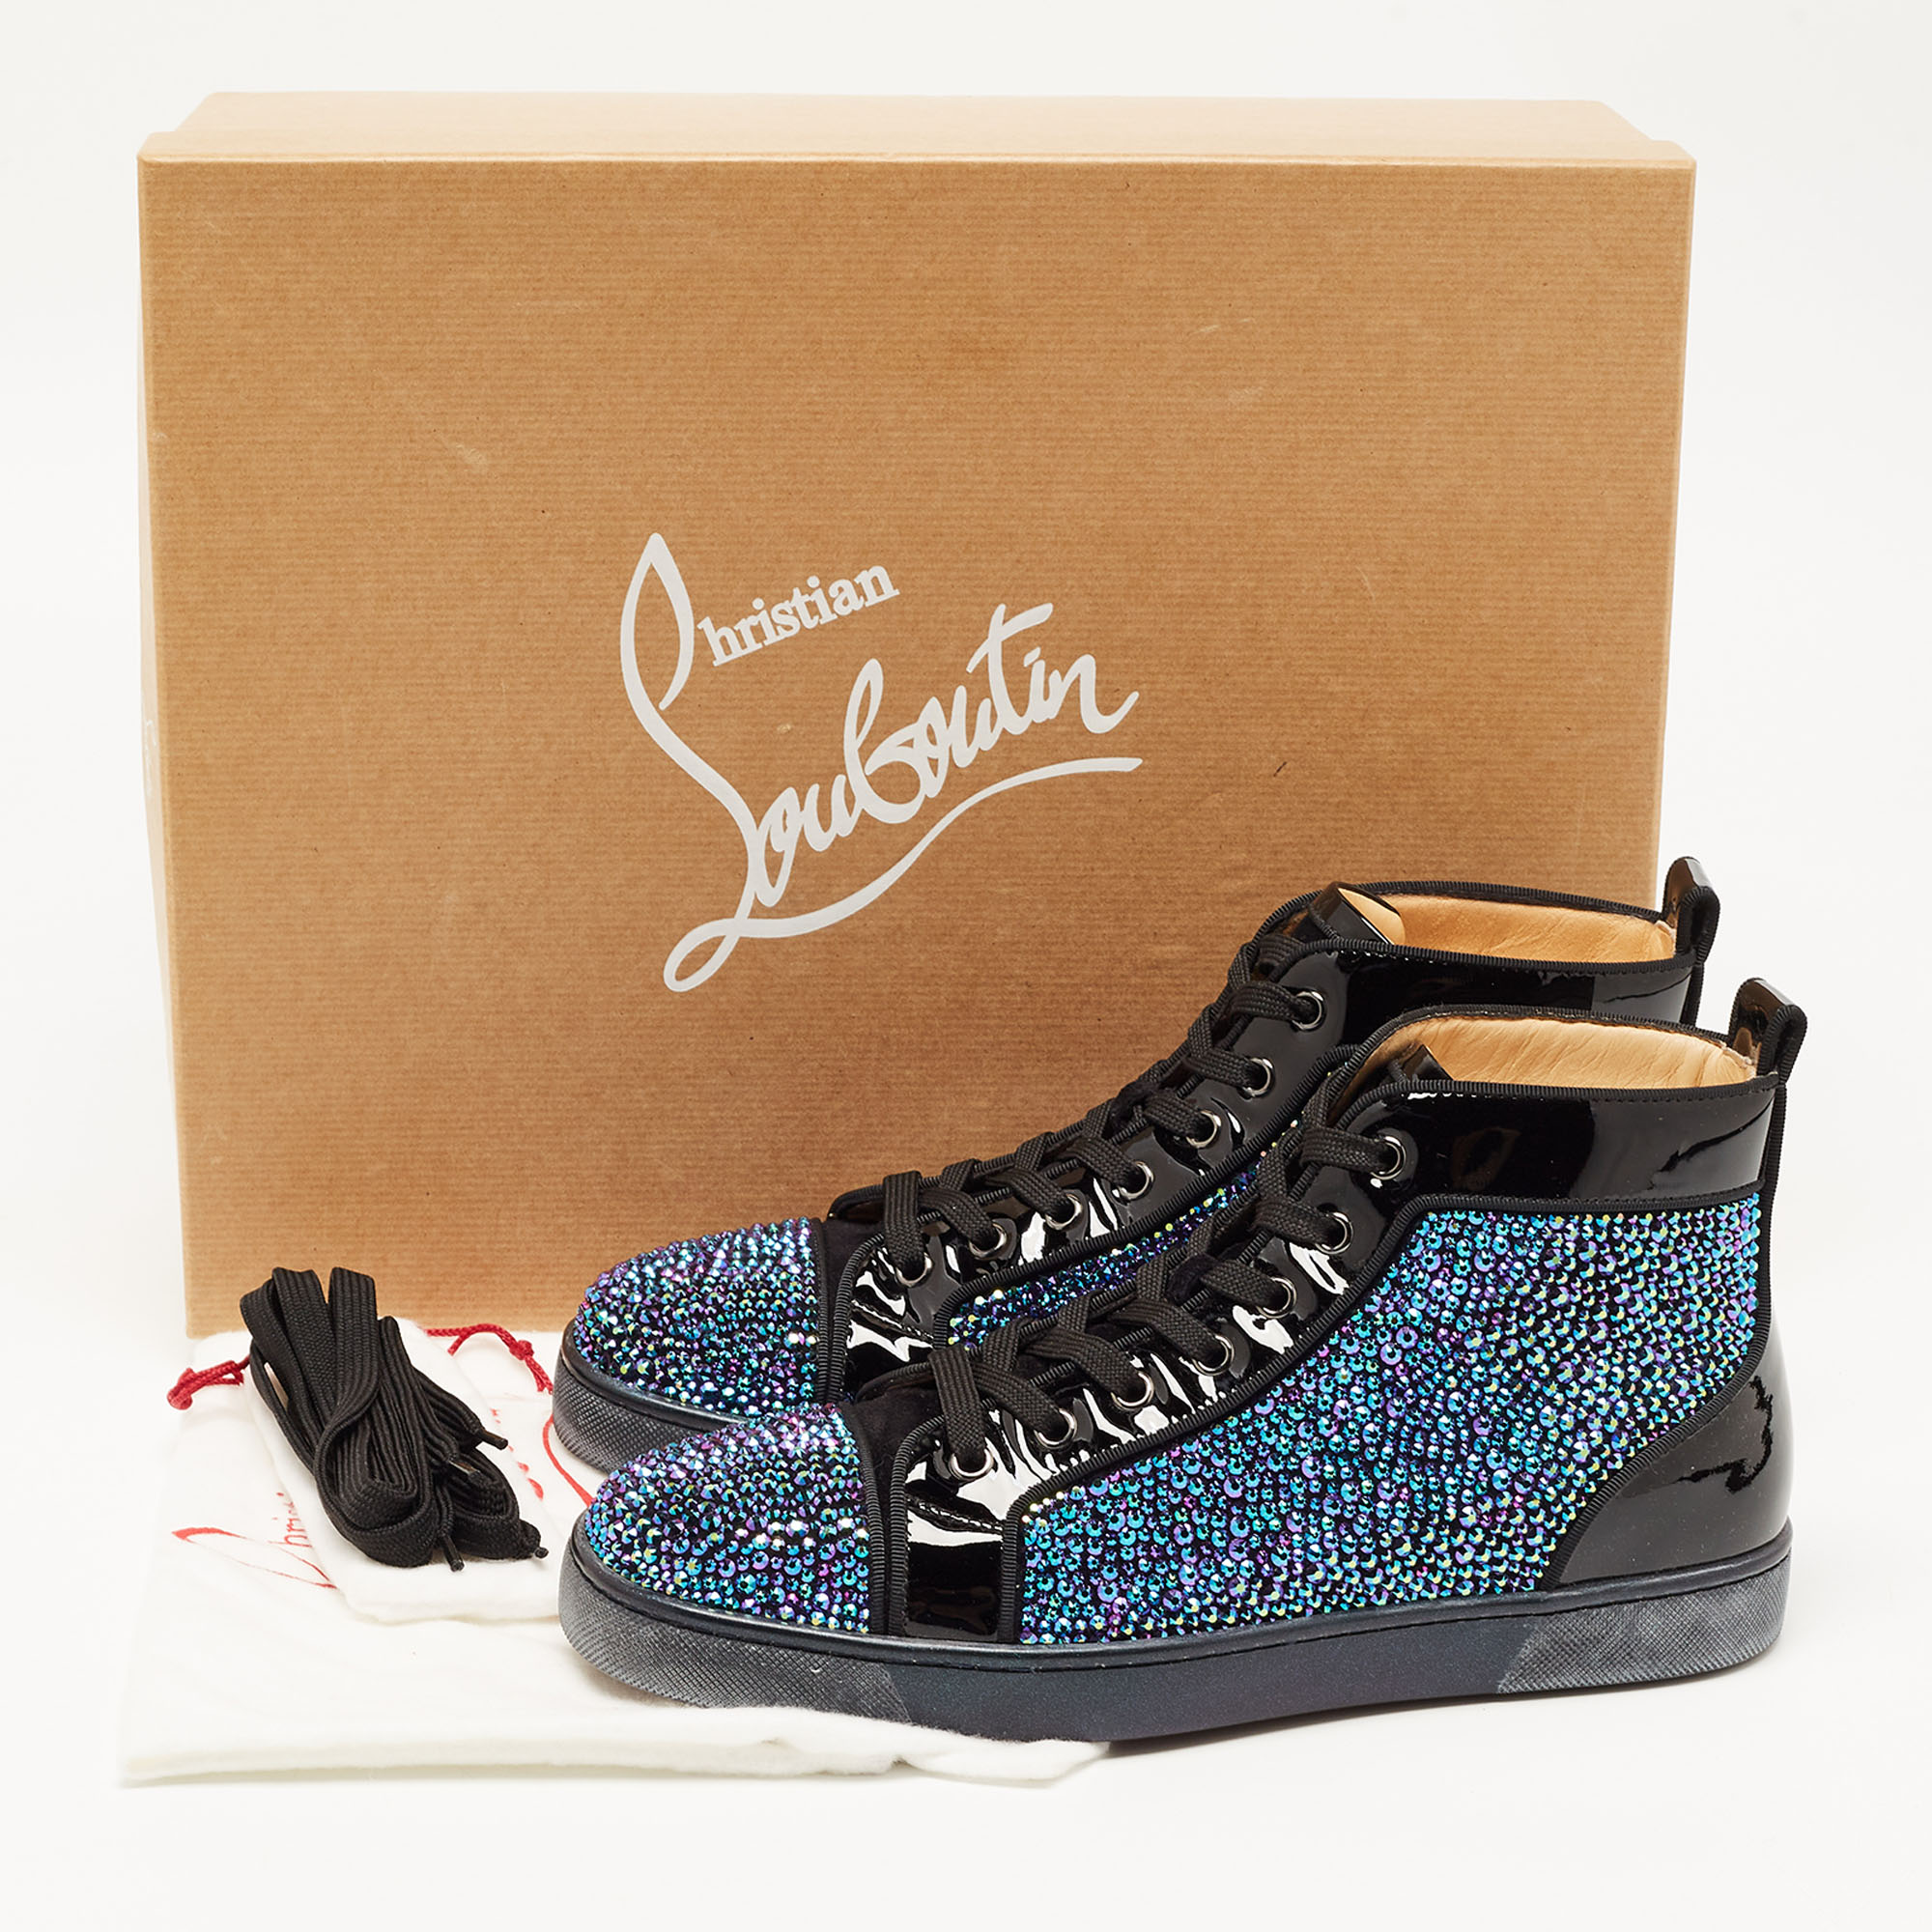 Christian Louboutin Black Patent Leather And Suede Embellished Louis High-Top Sneakers Size 40.5